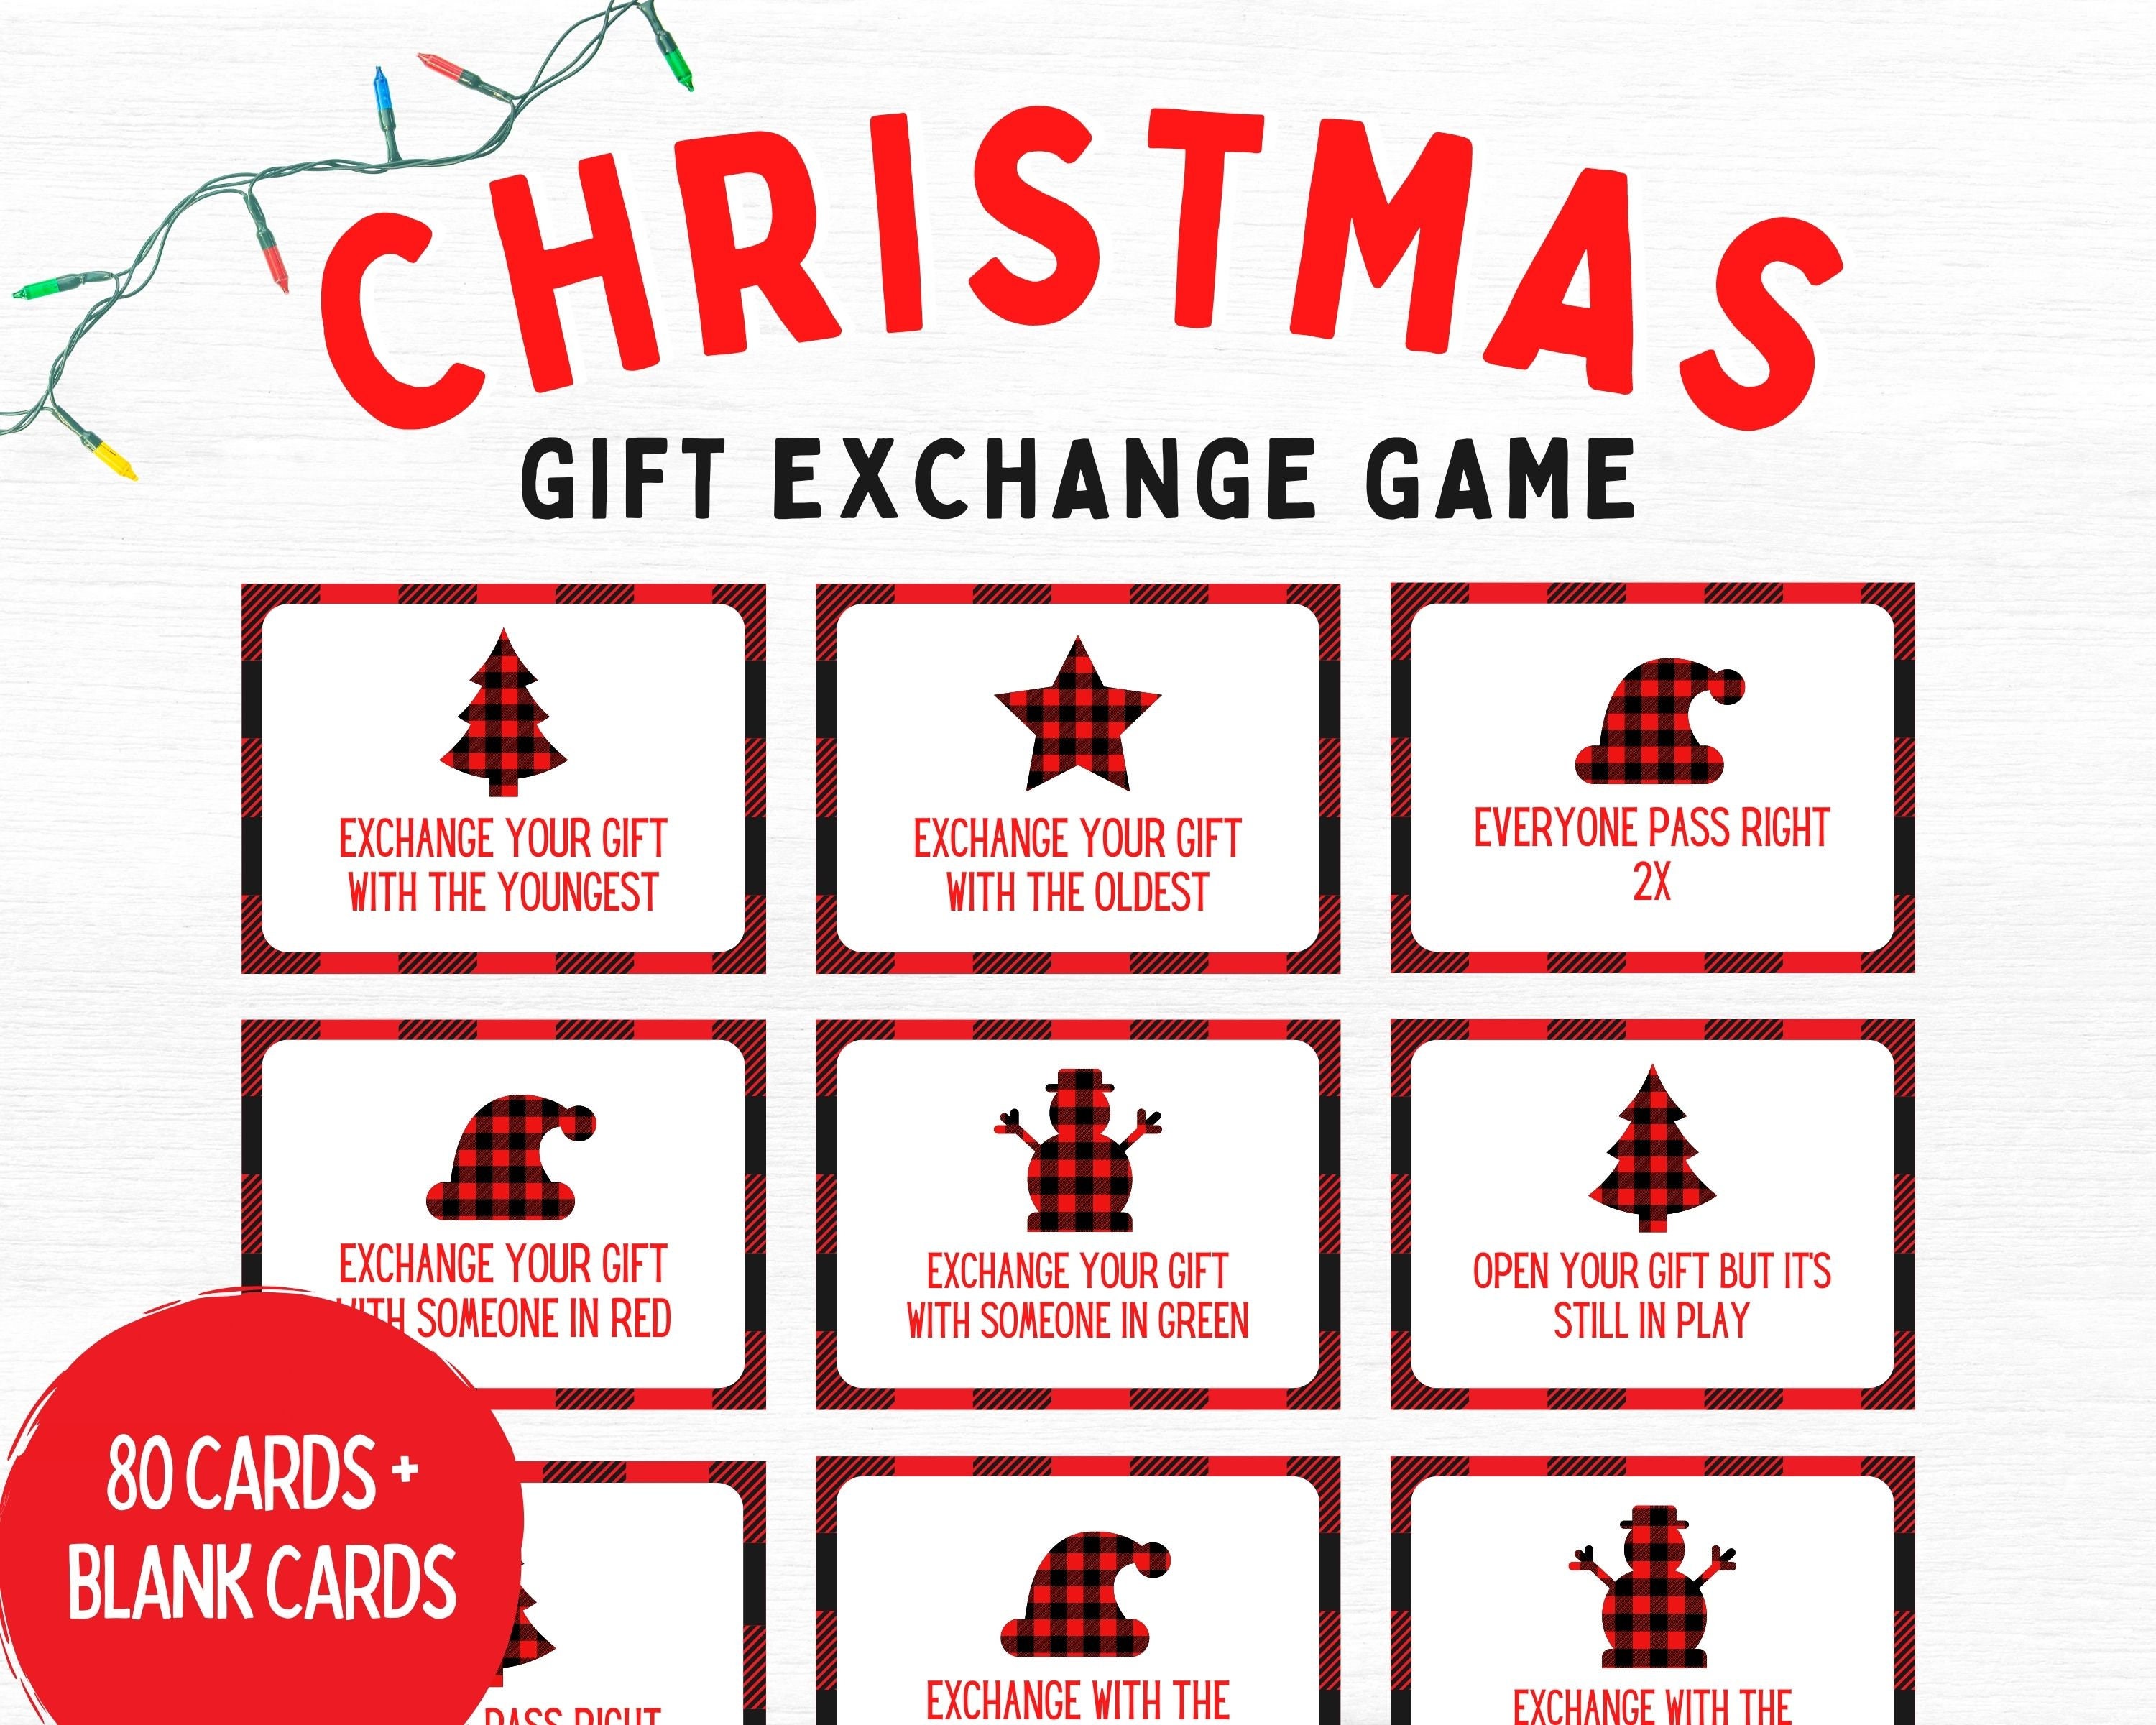 Christmas Gift Exchange Games: Fun Ideas to Make Your Holiday Party Unforgettable